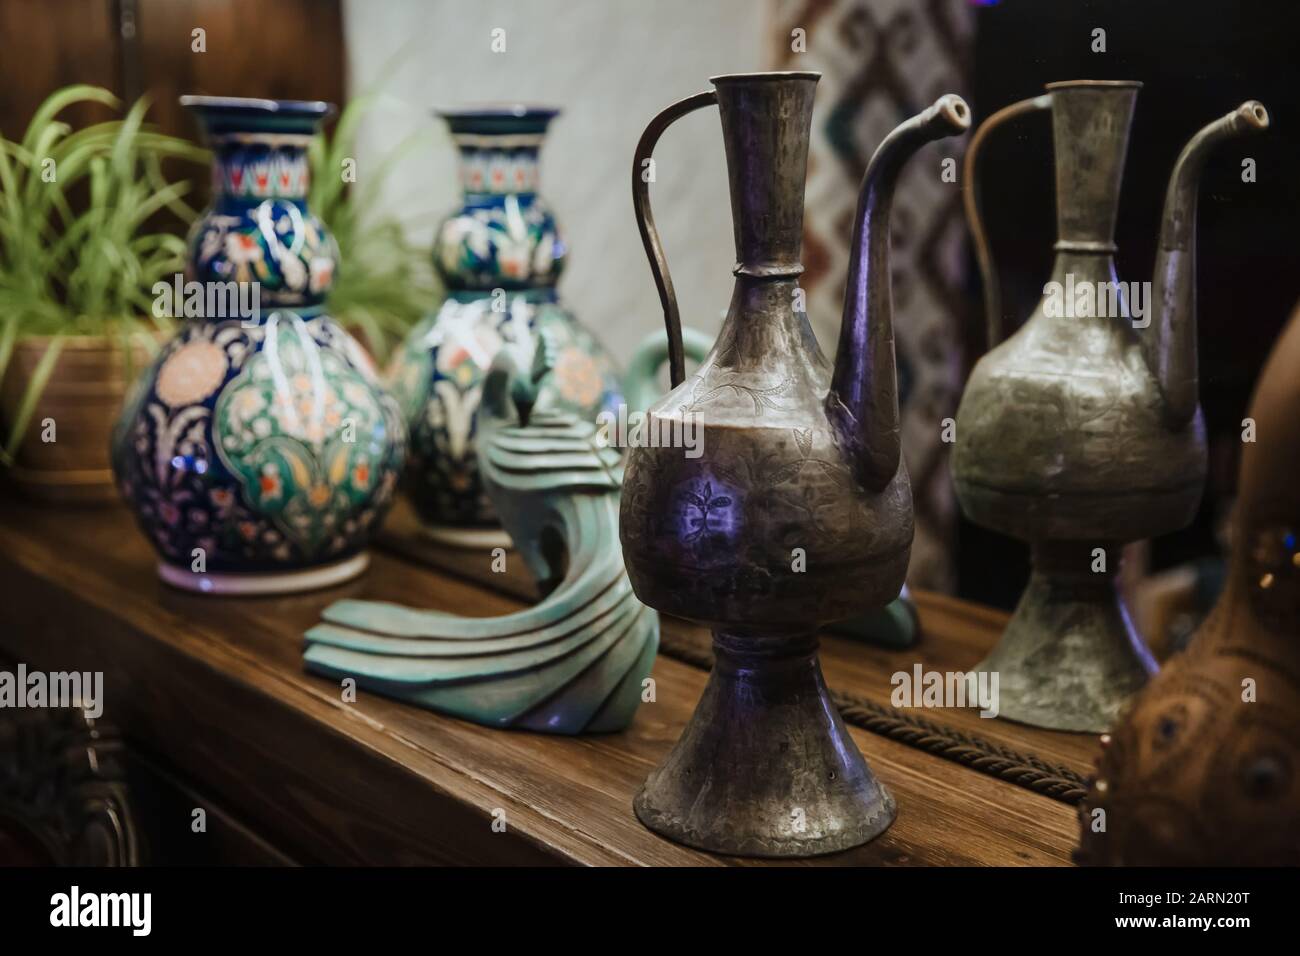 An ancient copper decanter and an ornate clay jug stand on a shelf. Stock Photo